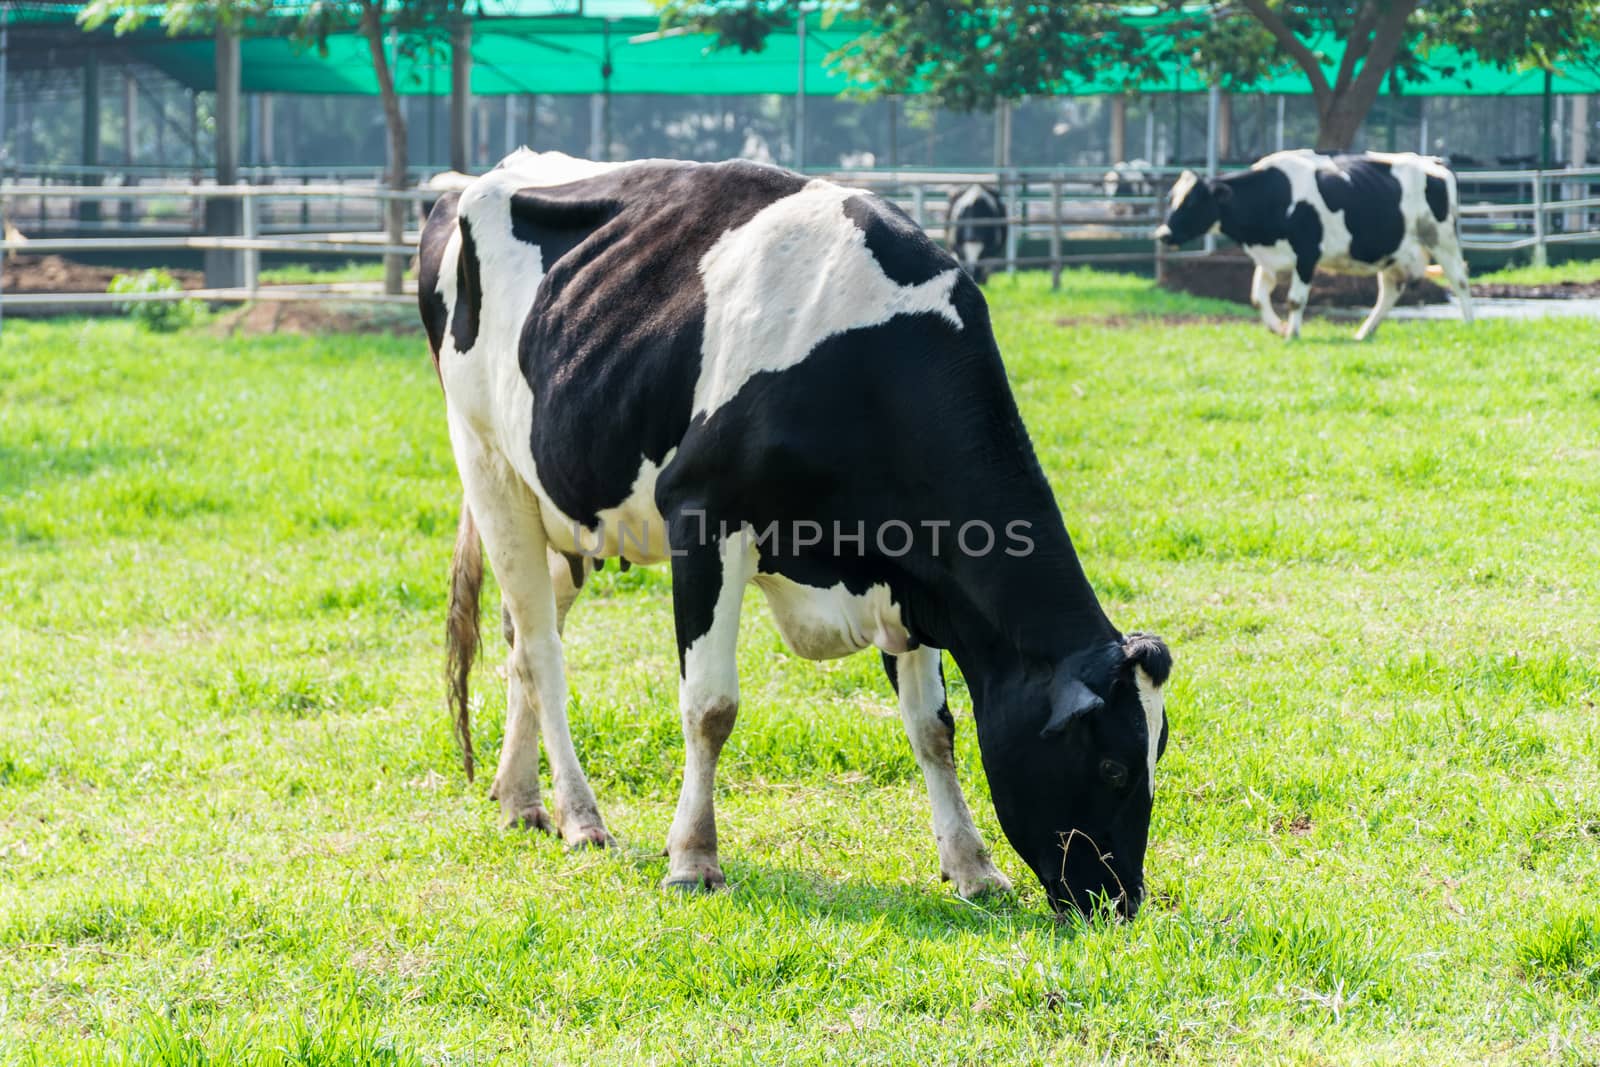 dairy cow in farm cows grazing in fresh pastures background nature